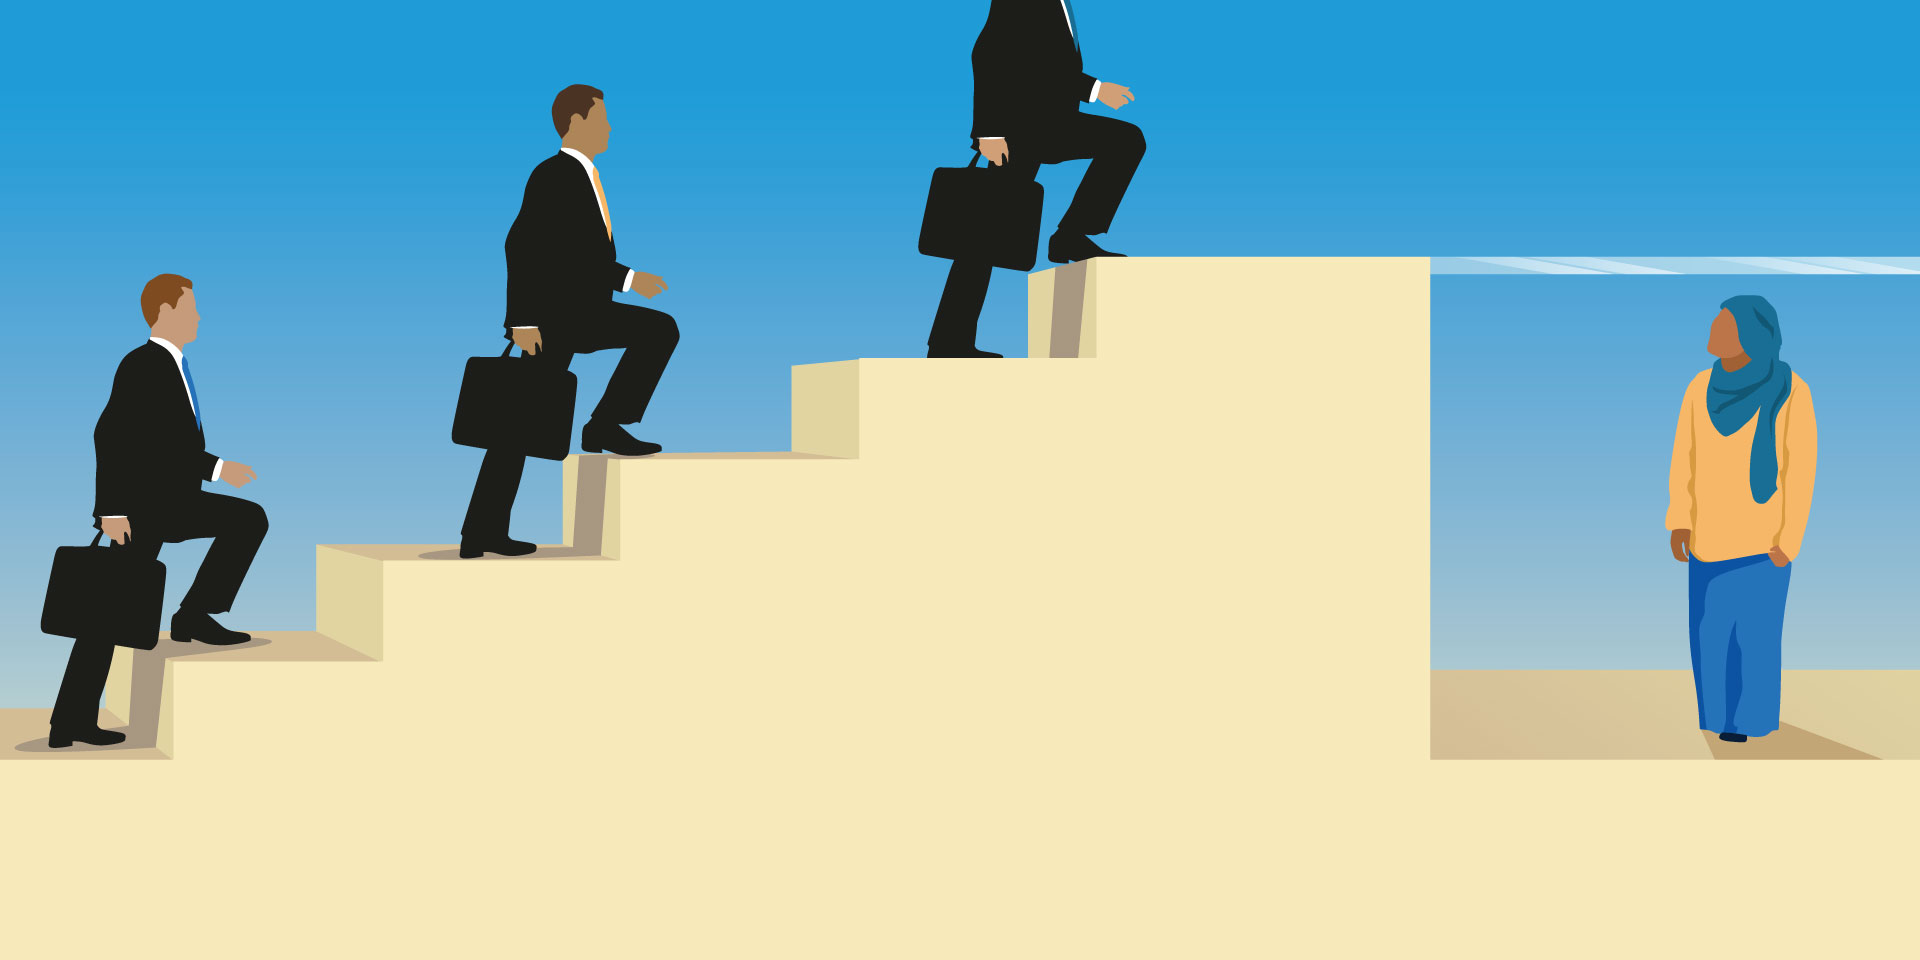 A graphic of several businessmen moving up a stairway as a person in traditional clothing stands under a glass ceiling.